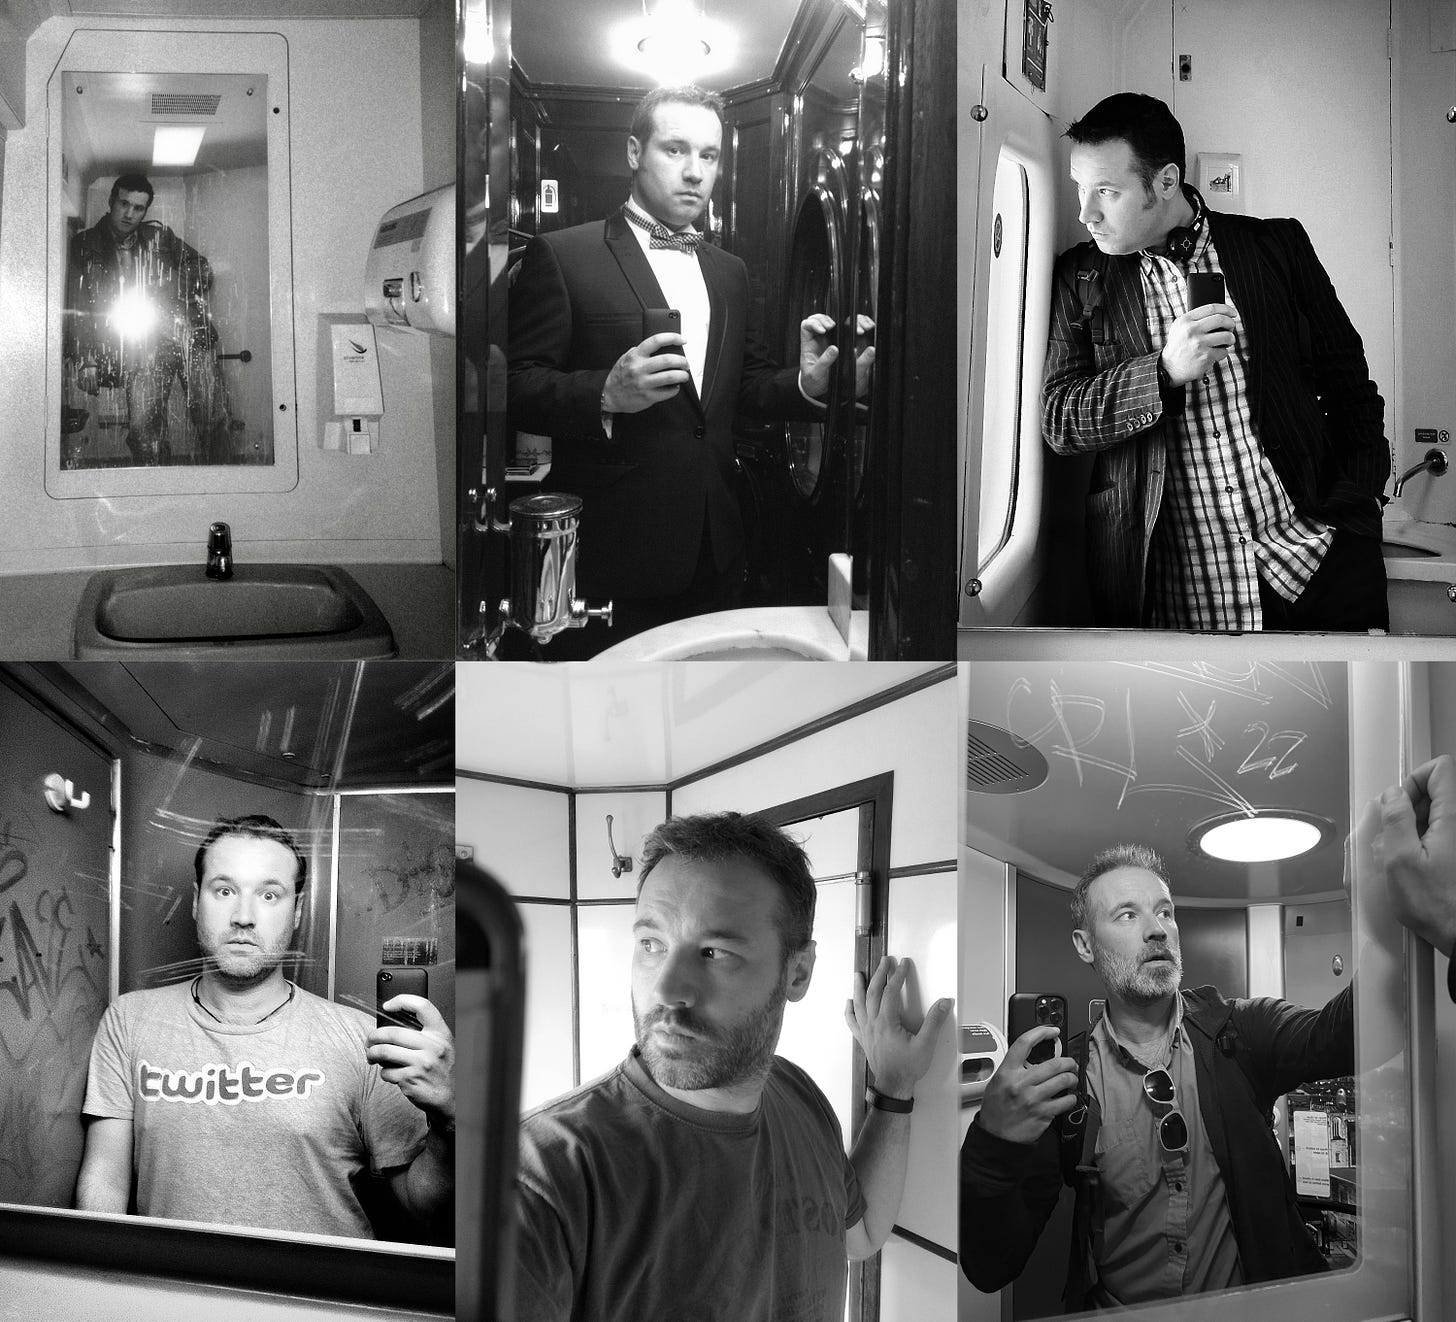 A montage of six selfies taken in the mirrors of train toilets over the past 27 years. Top left I was using the Ricoh GR1 film camera. All the other photographs have been taken with an iPhone. One of them on the orient express, another one on a train in Europe and another one in an old English steam train. There must be more in the archives, but probably on negatives.